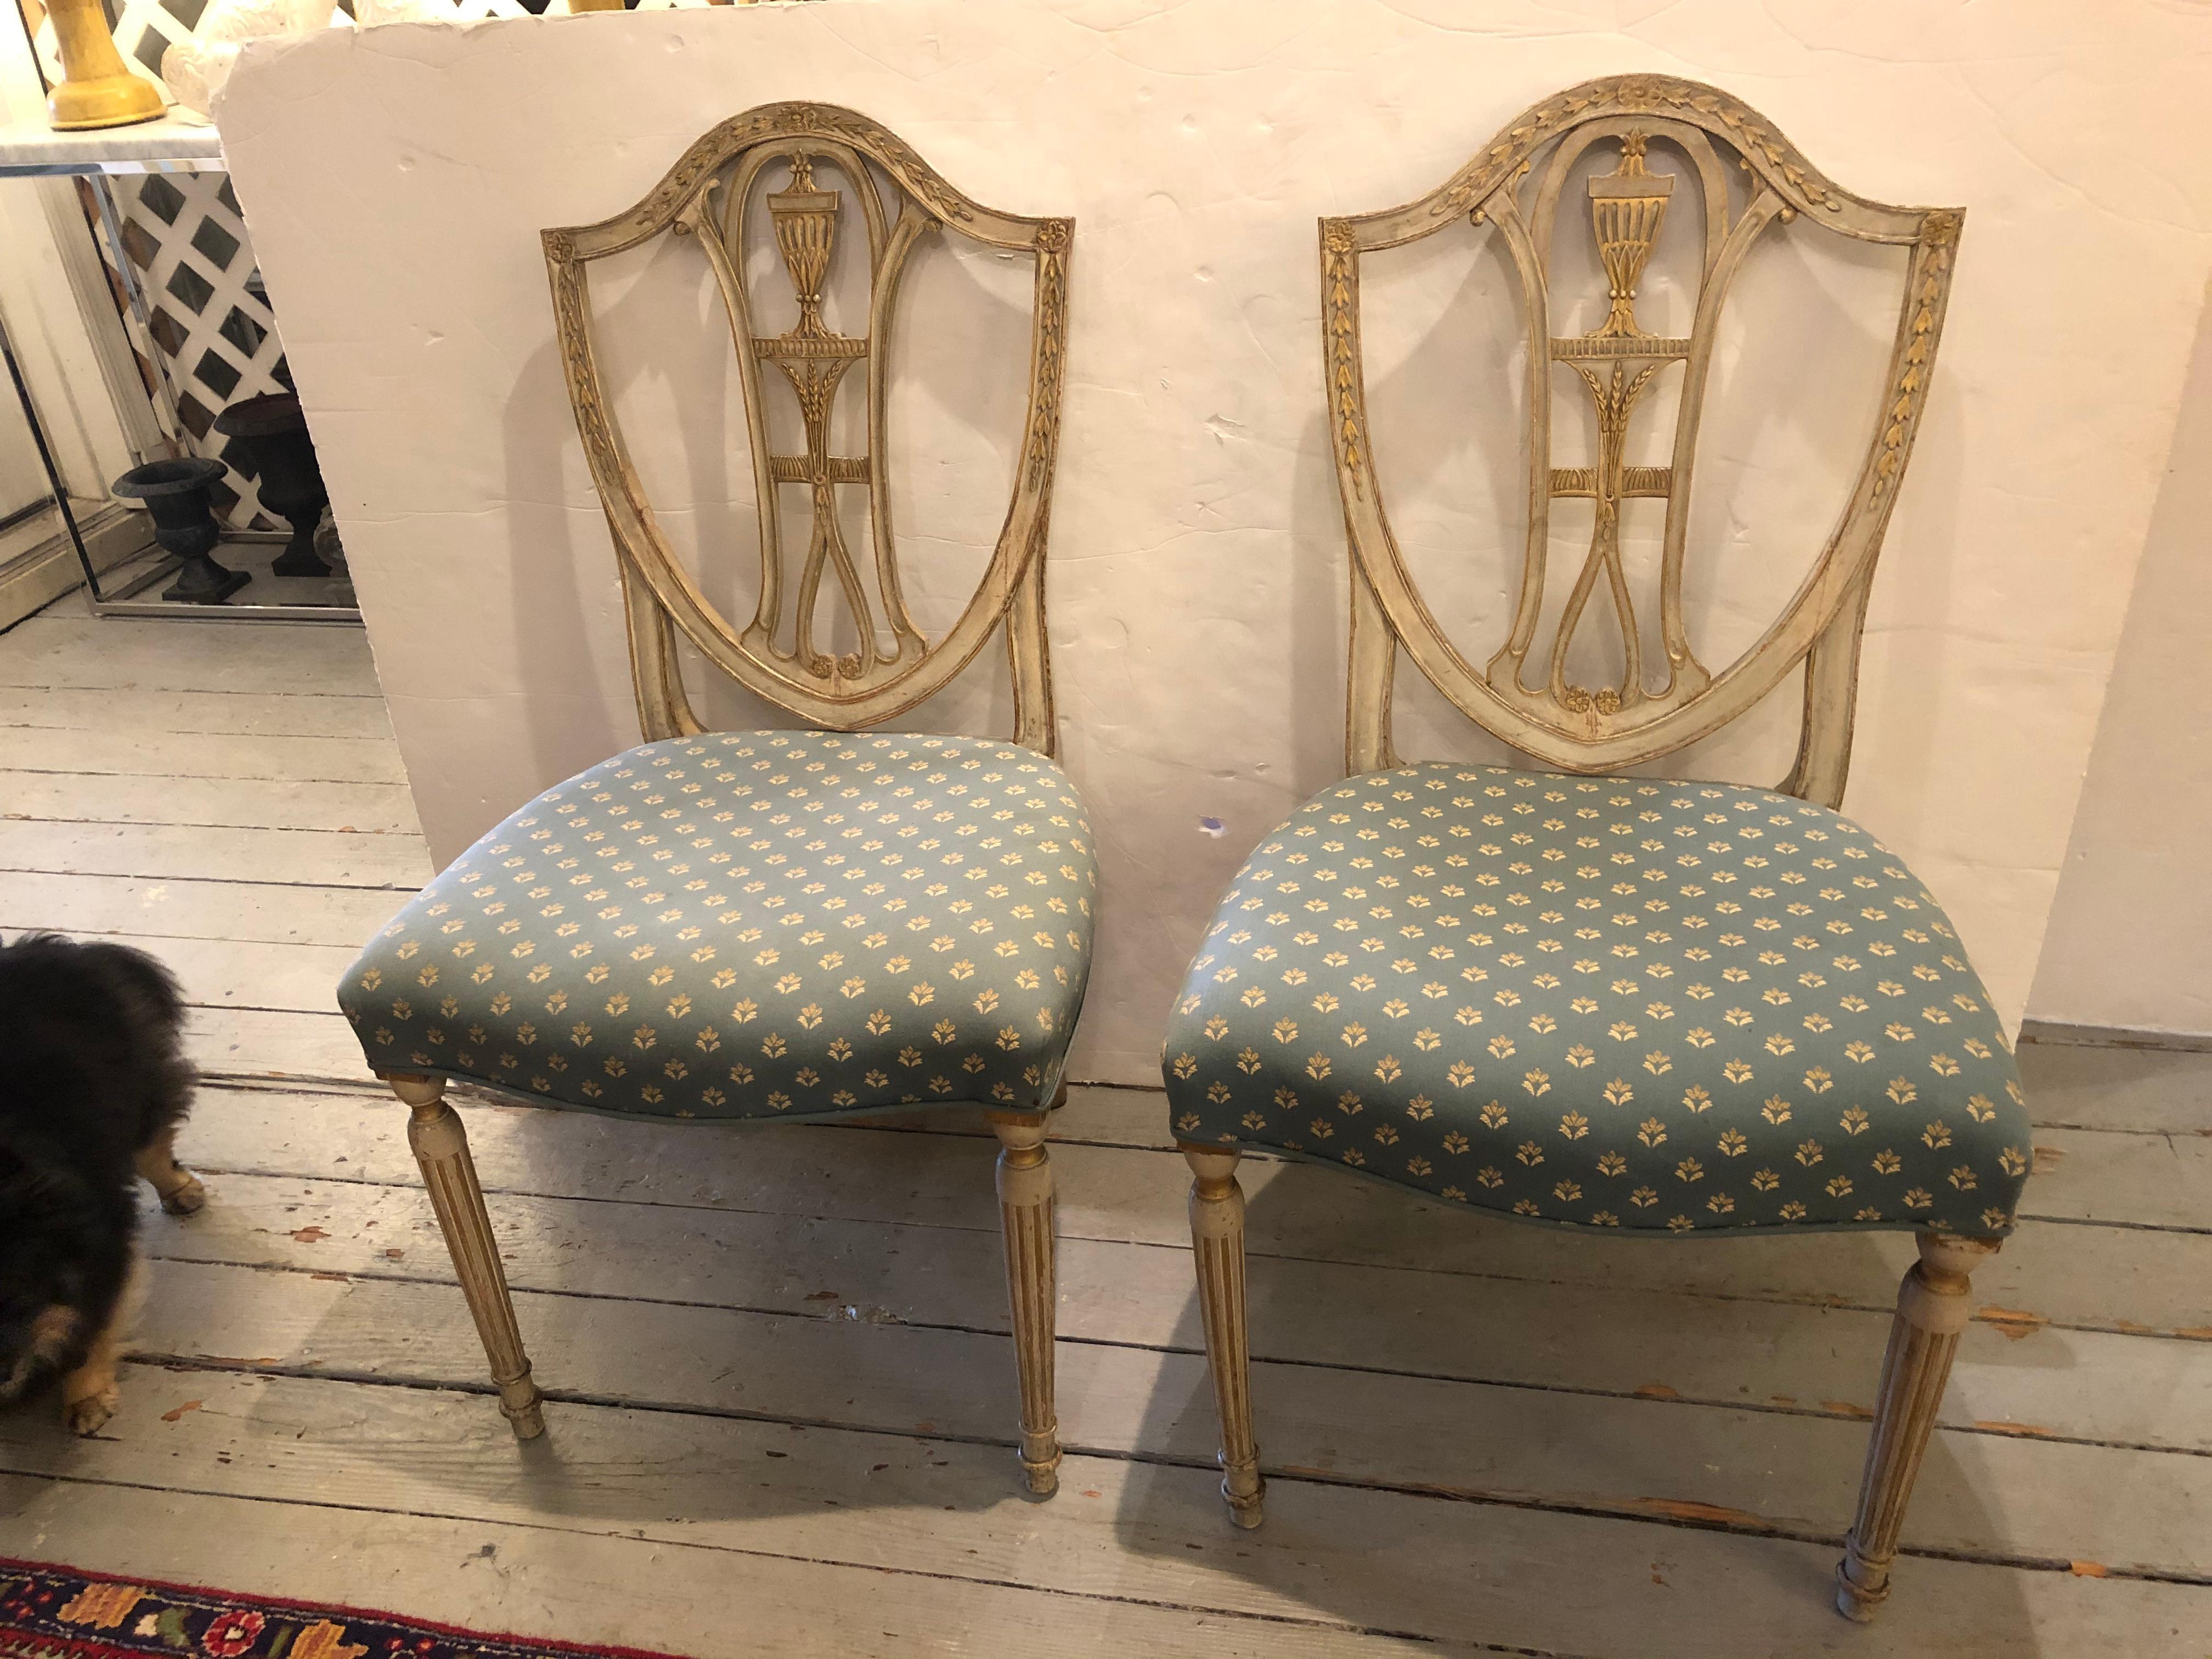 1790 French Neoclassical beautiful original grey painted side chairs with traces of old gilding, carved with acanthus leaves, wheat and urns.  Reeded legs.  